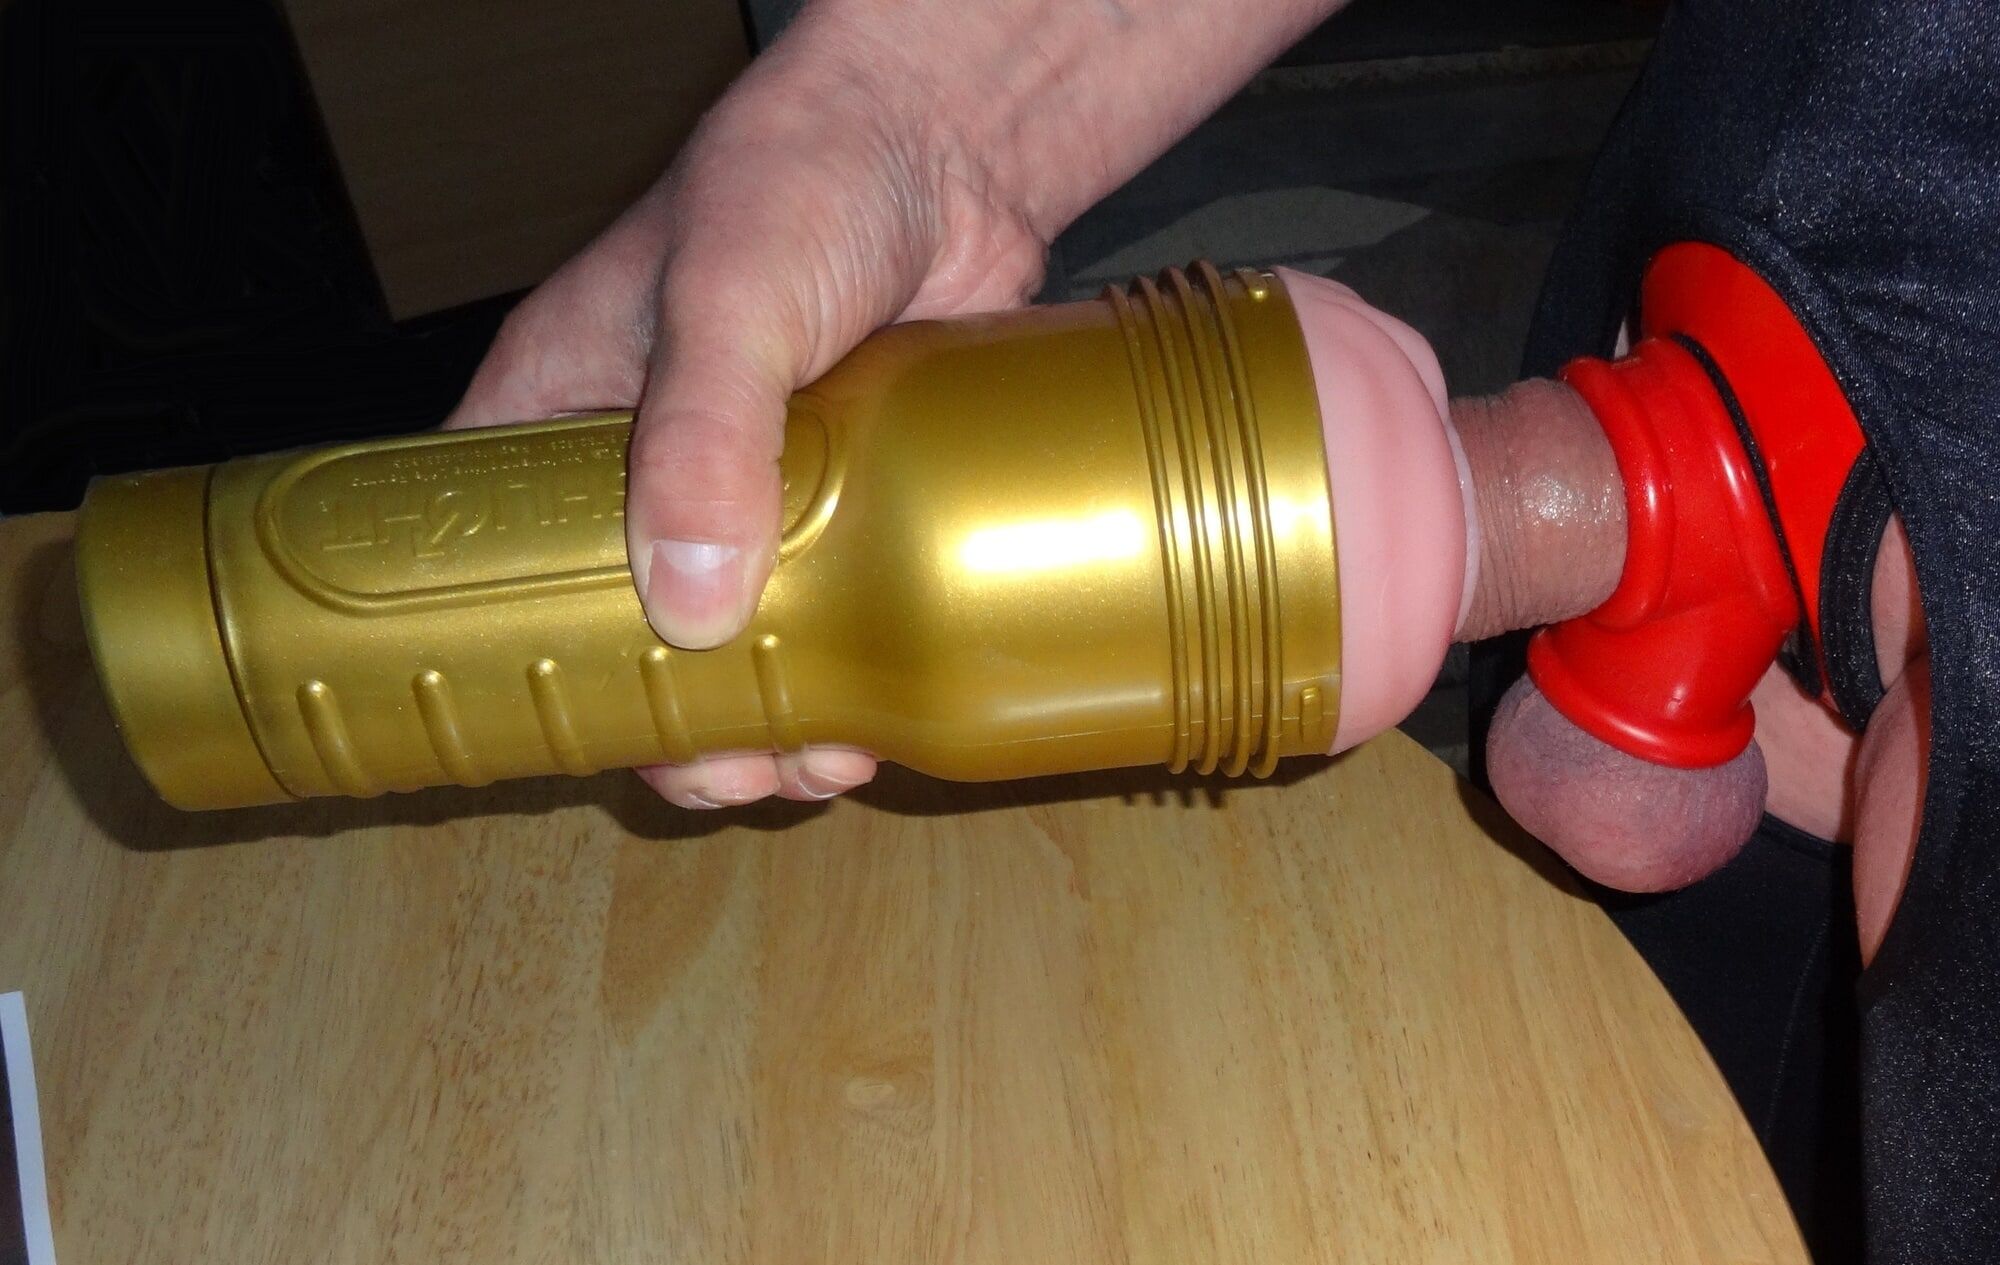 My cock with fleshlight #8